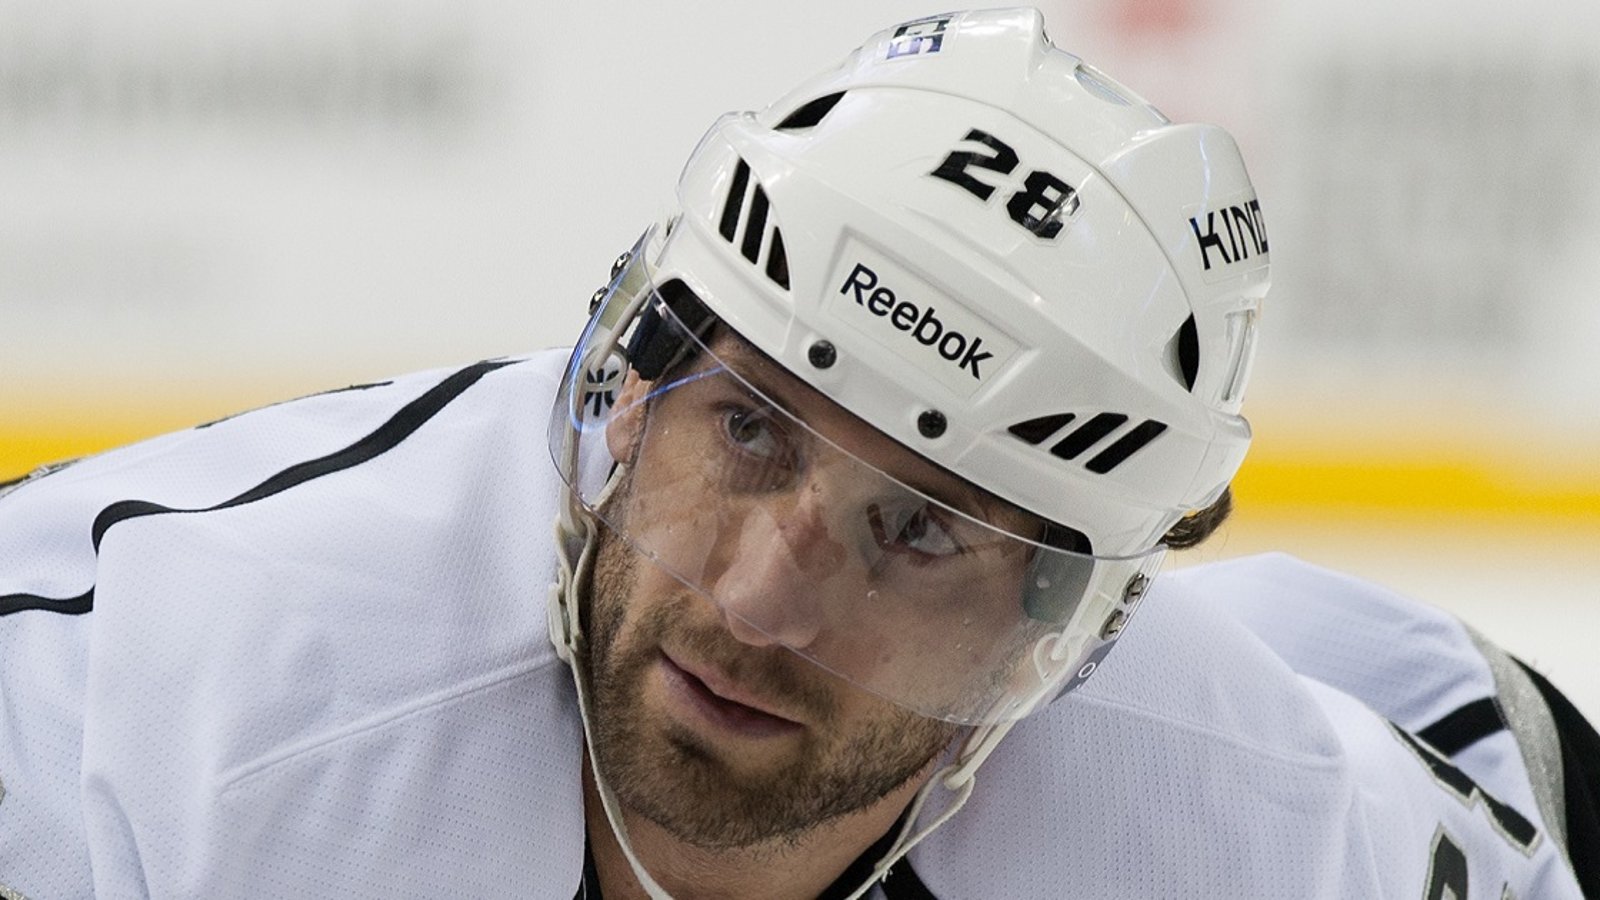 NHL veteran reveals “several players” were taking injections before playoff games.